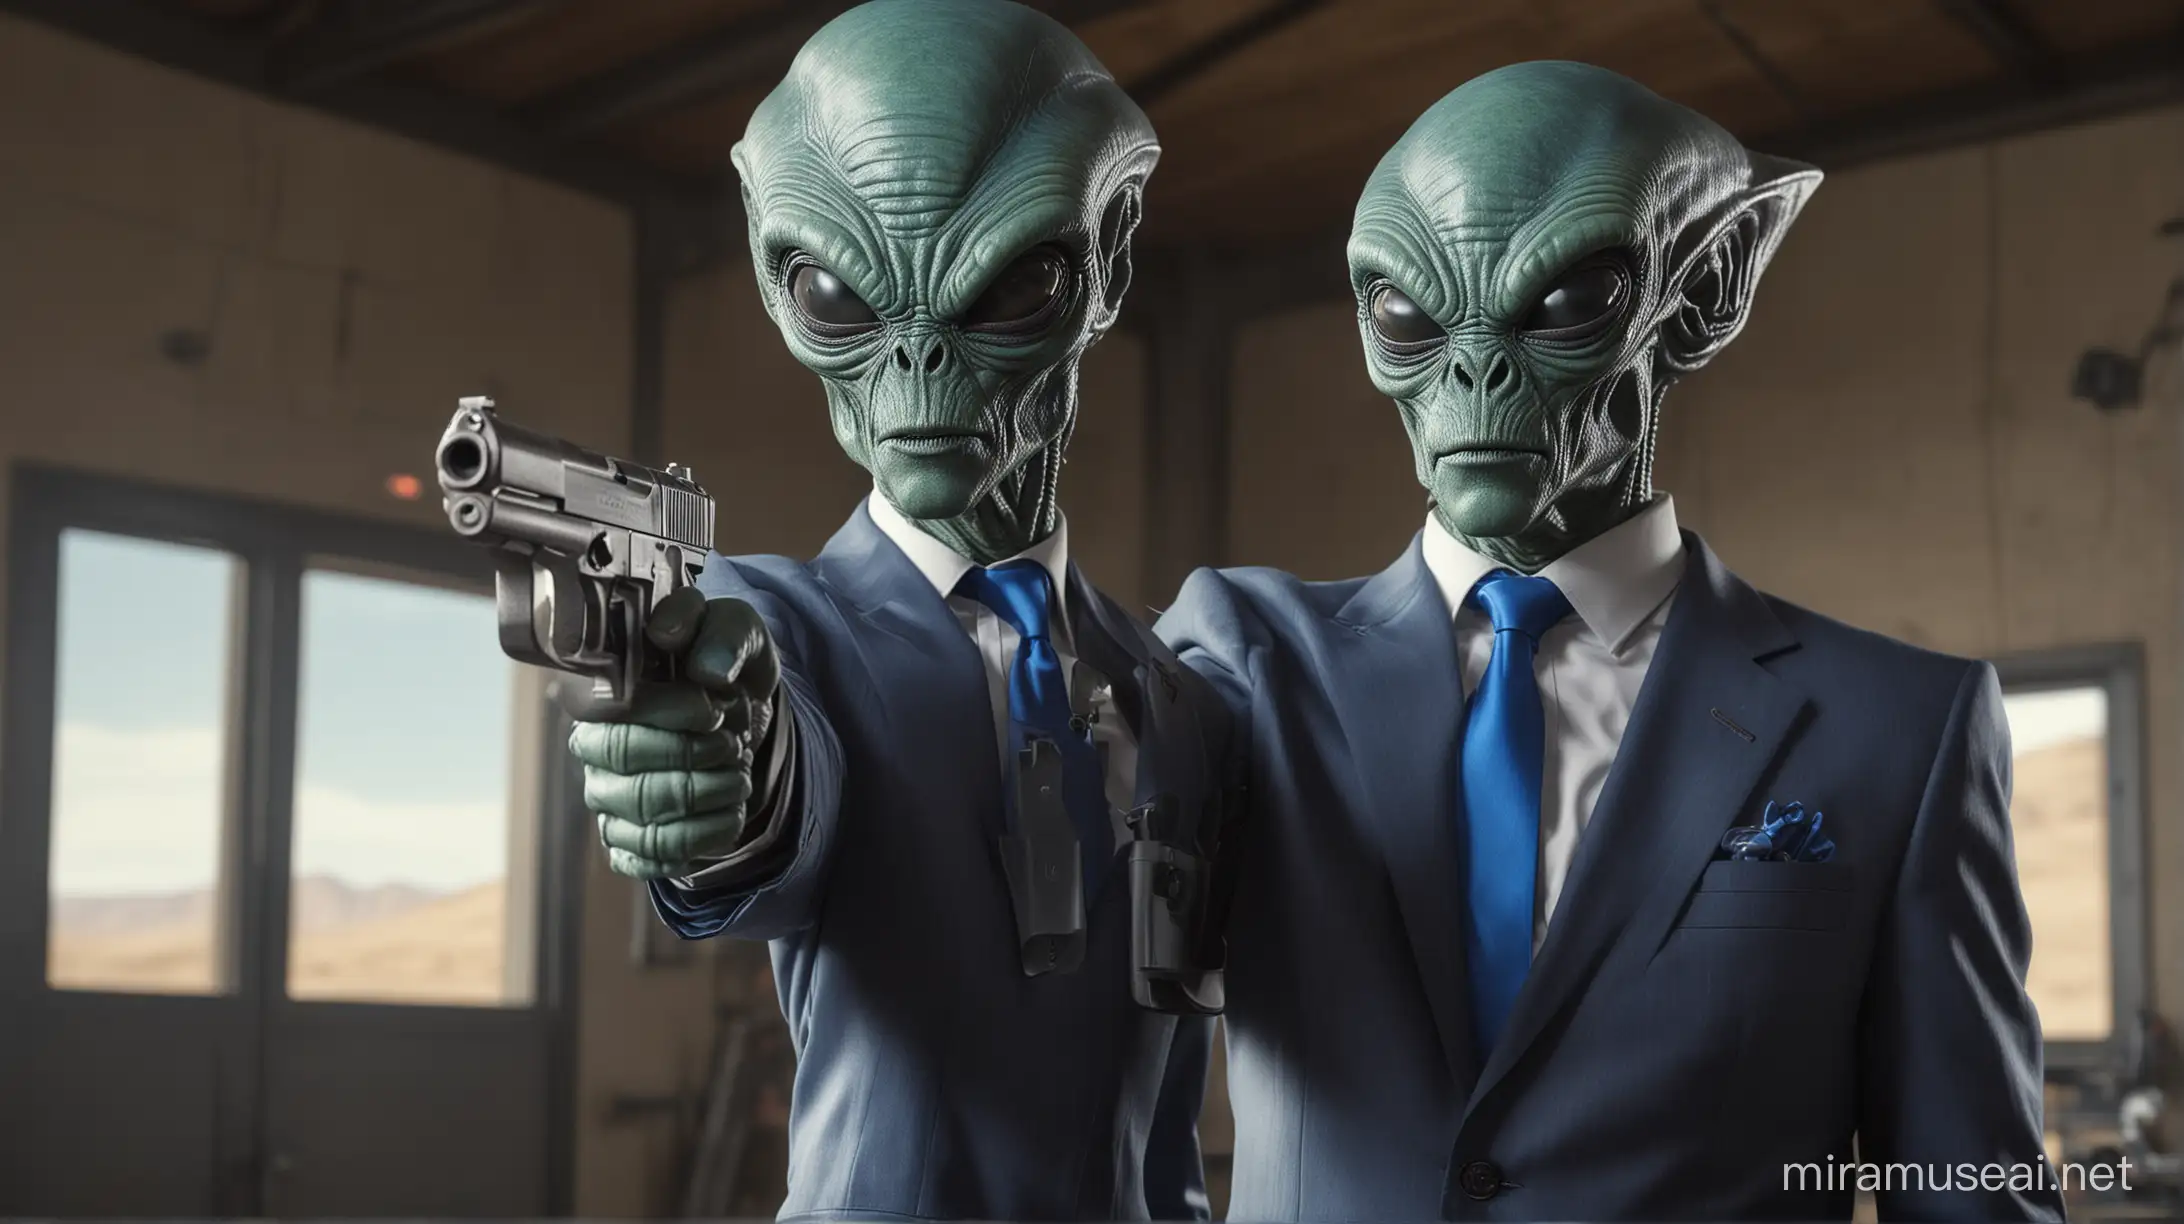 an alien dressed in a suit with a blue tie at a shooting range holding and aiming a realistic hand gun